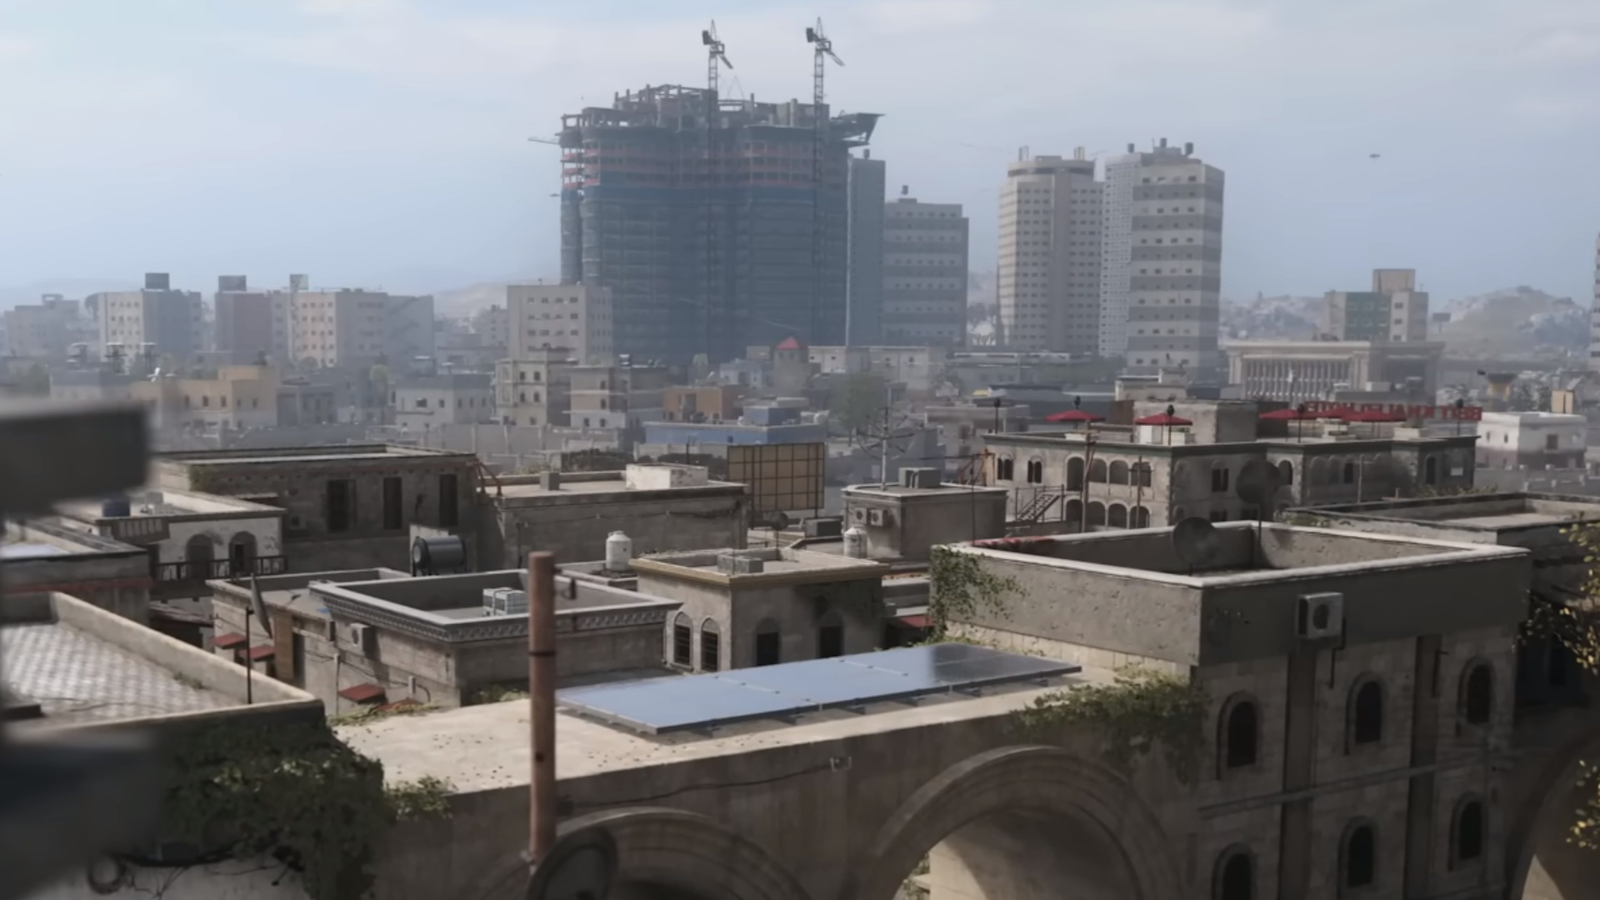 Call of Duty: Next Reveals Urzikstan, the New Big Map Coming to